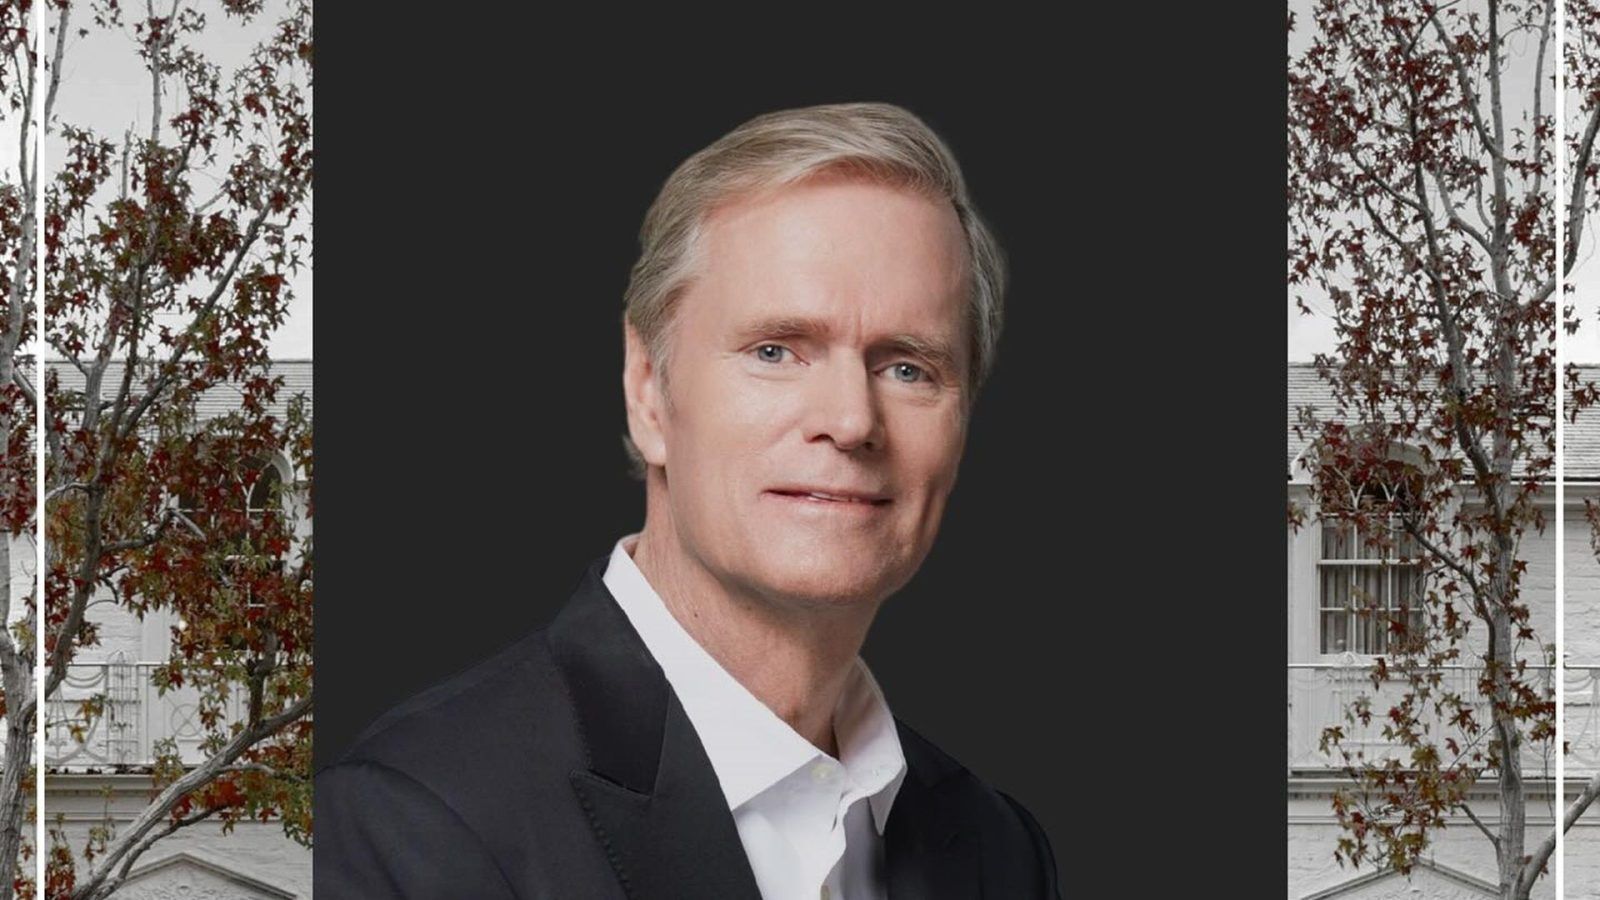 Richard Hilton’s net worth: Details about the real estate empire, earnings and assets